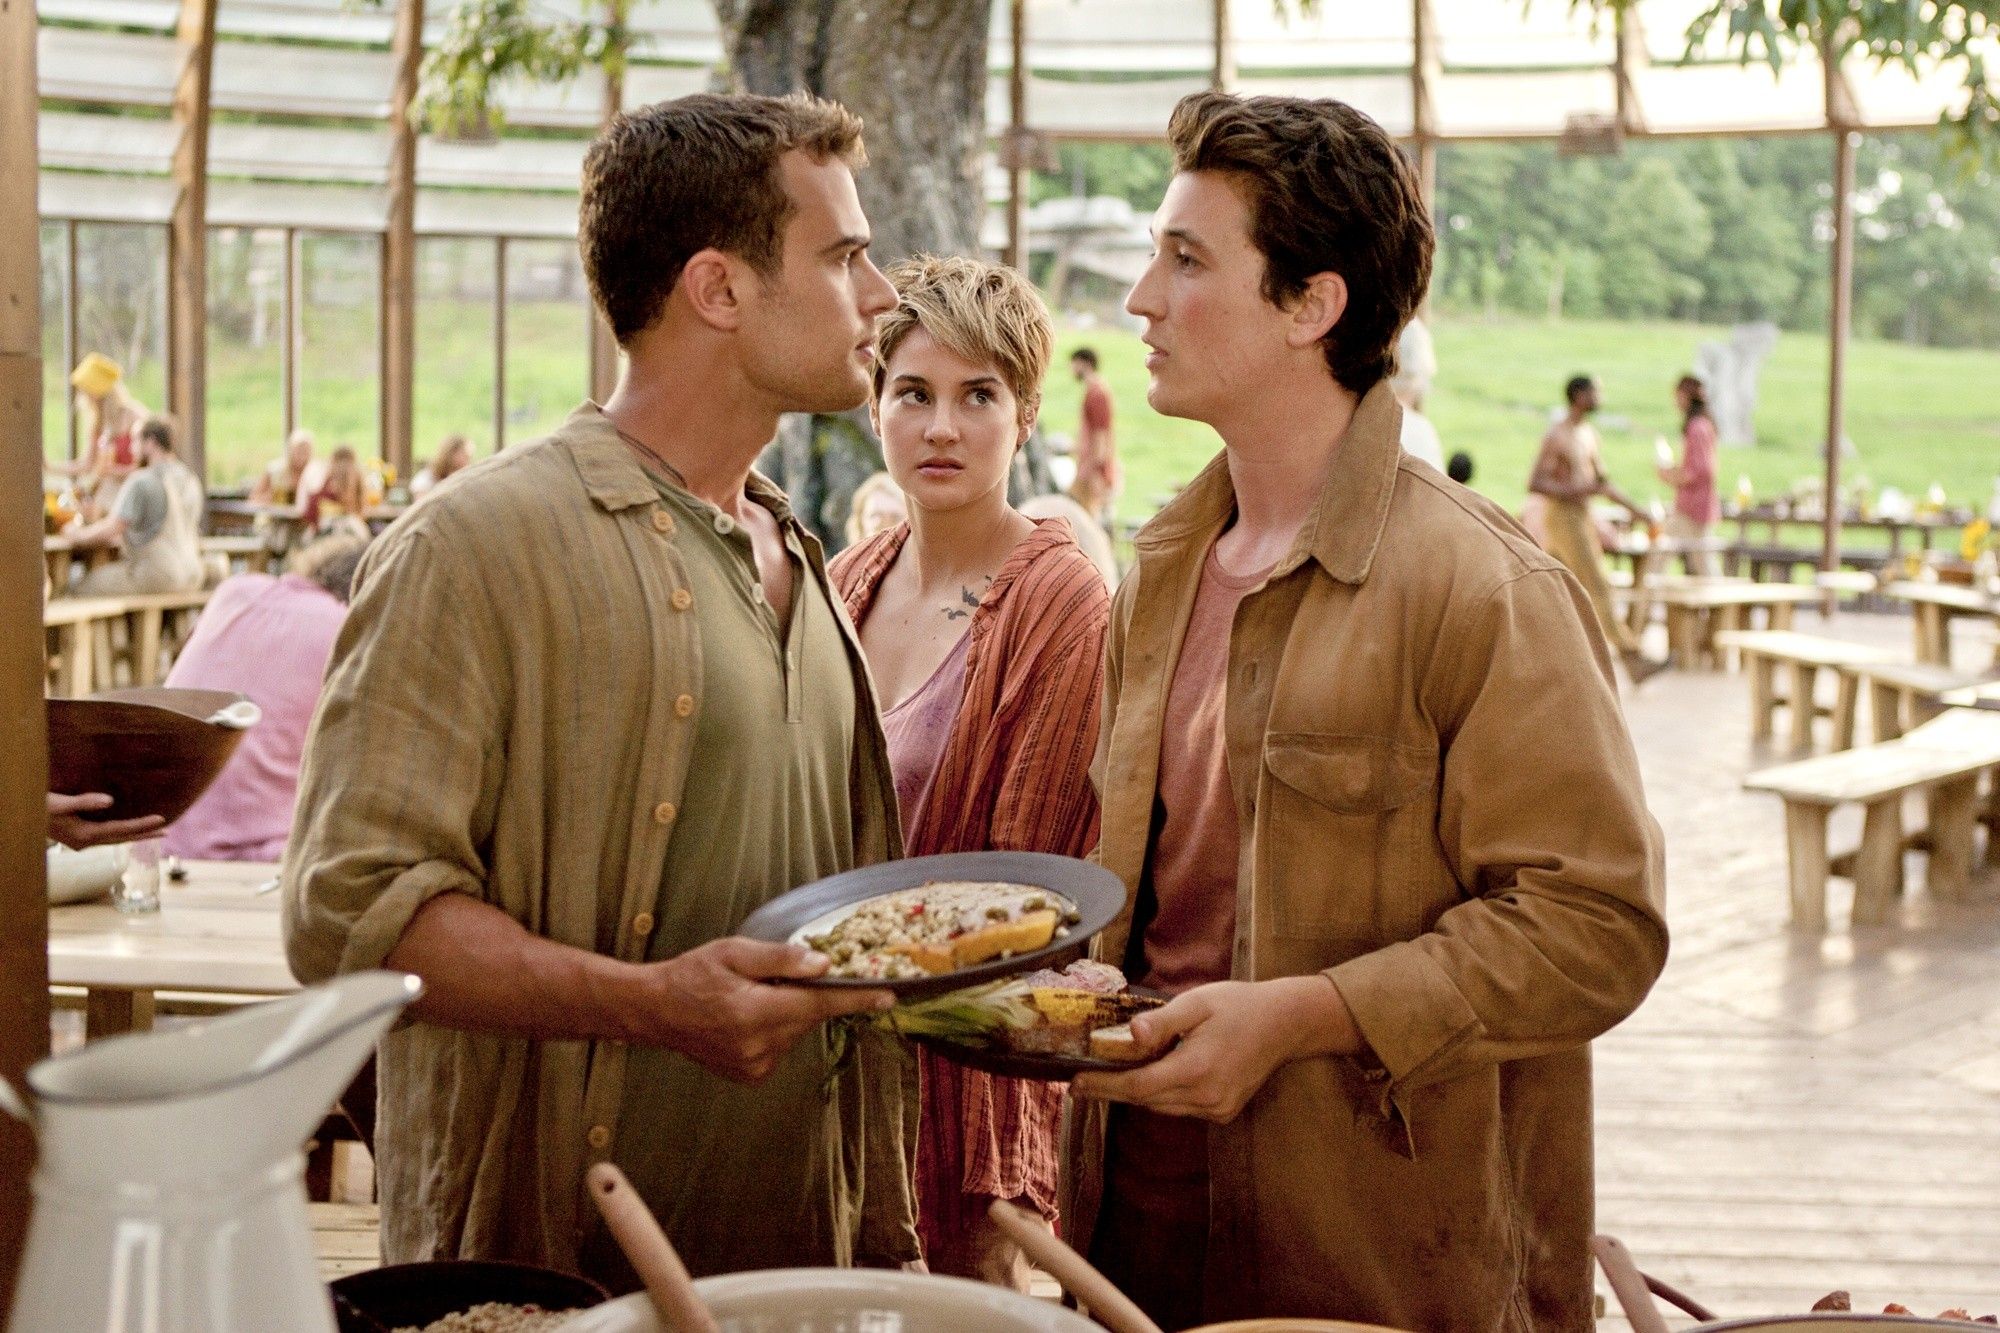 Theo James, Shailene Woodley and Miles Teller in Summit Entertainment's The Divergent Series: Insurgent (2015)